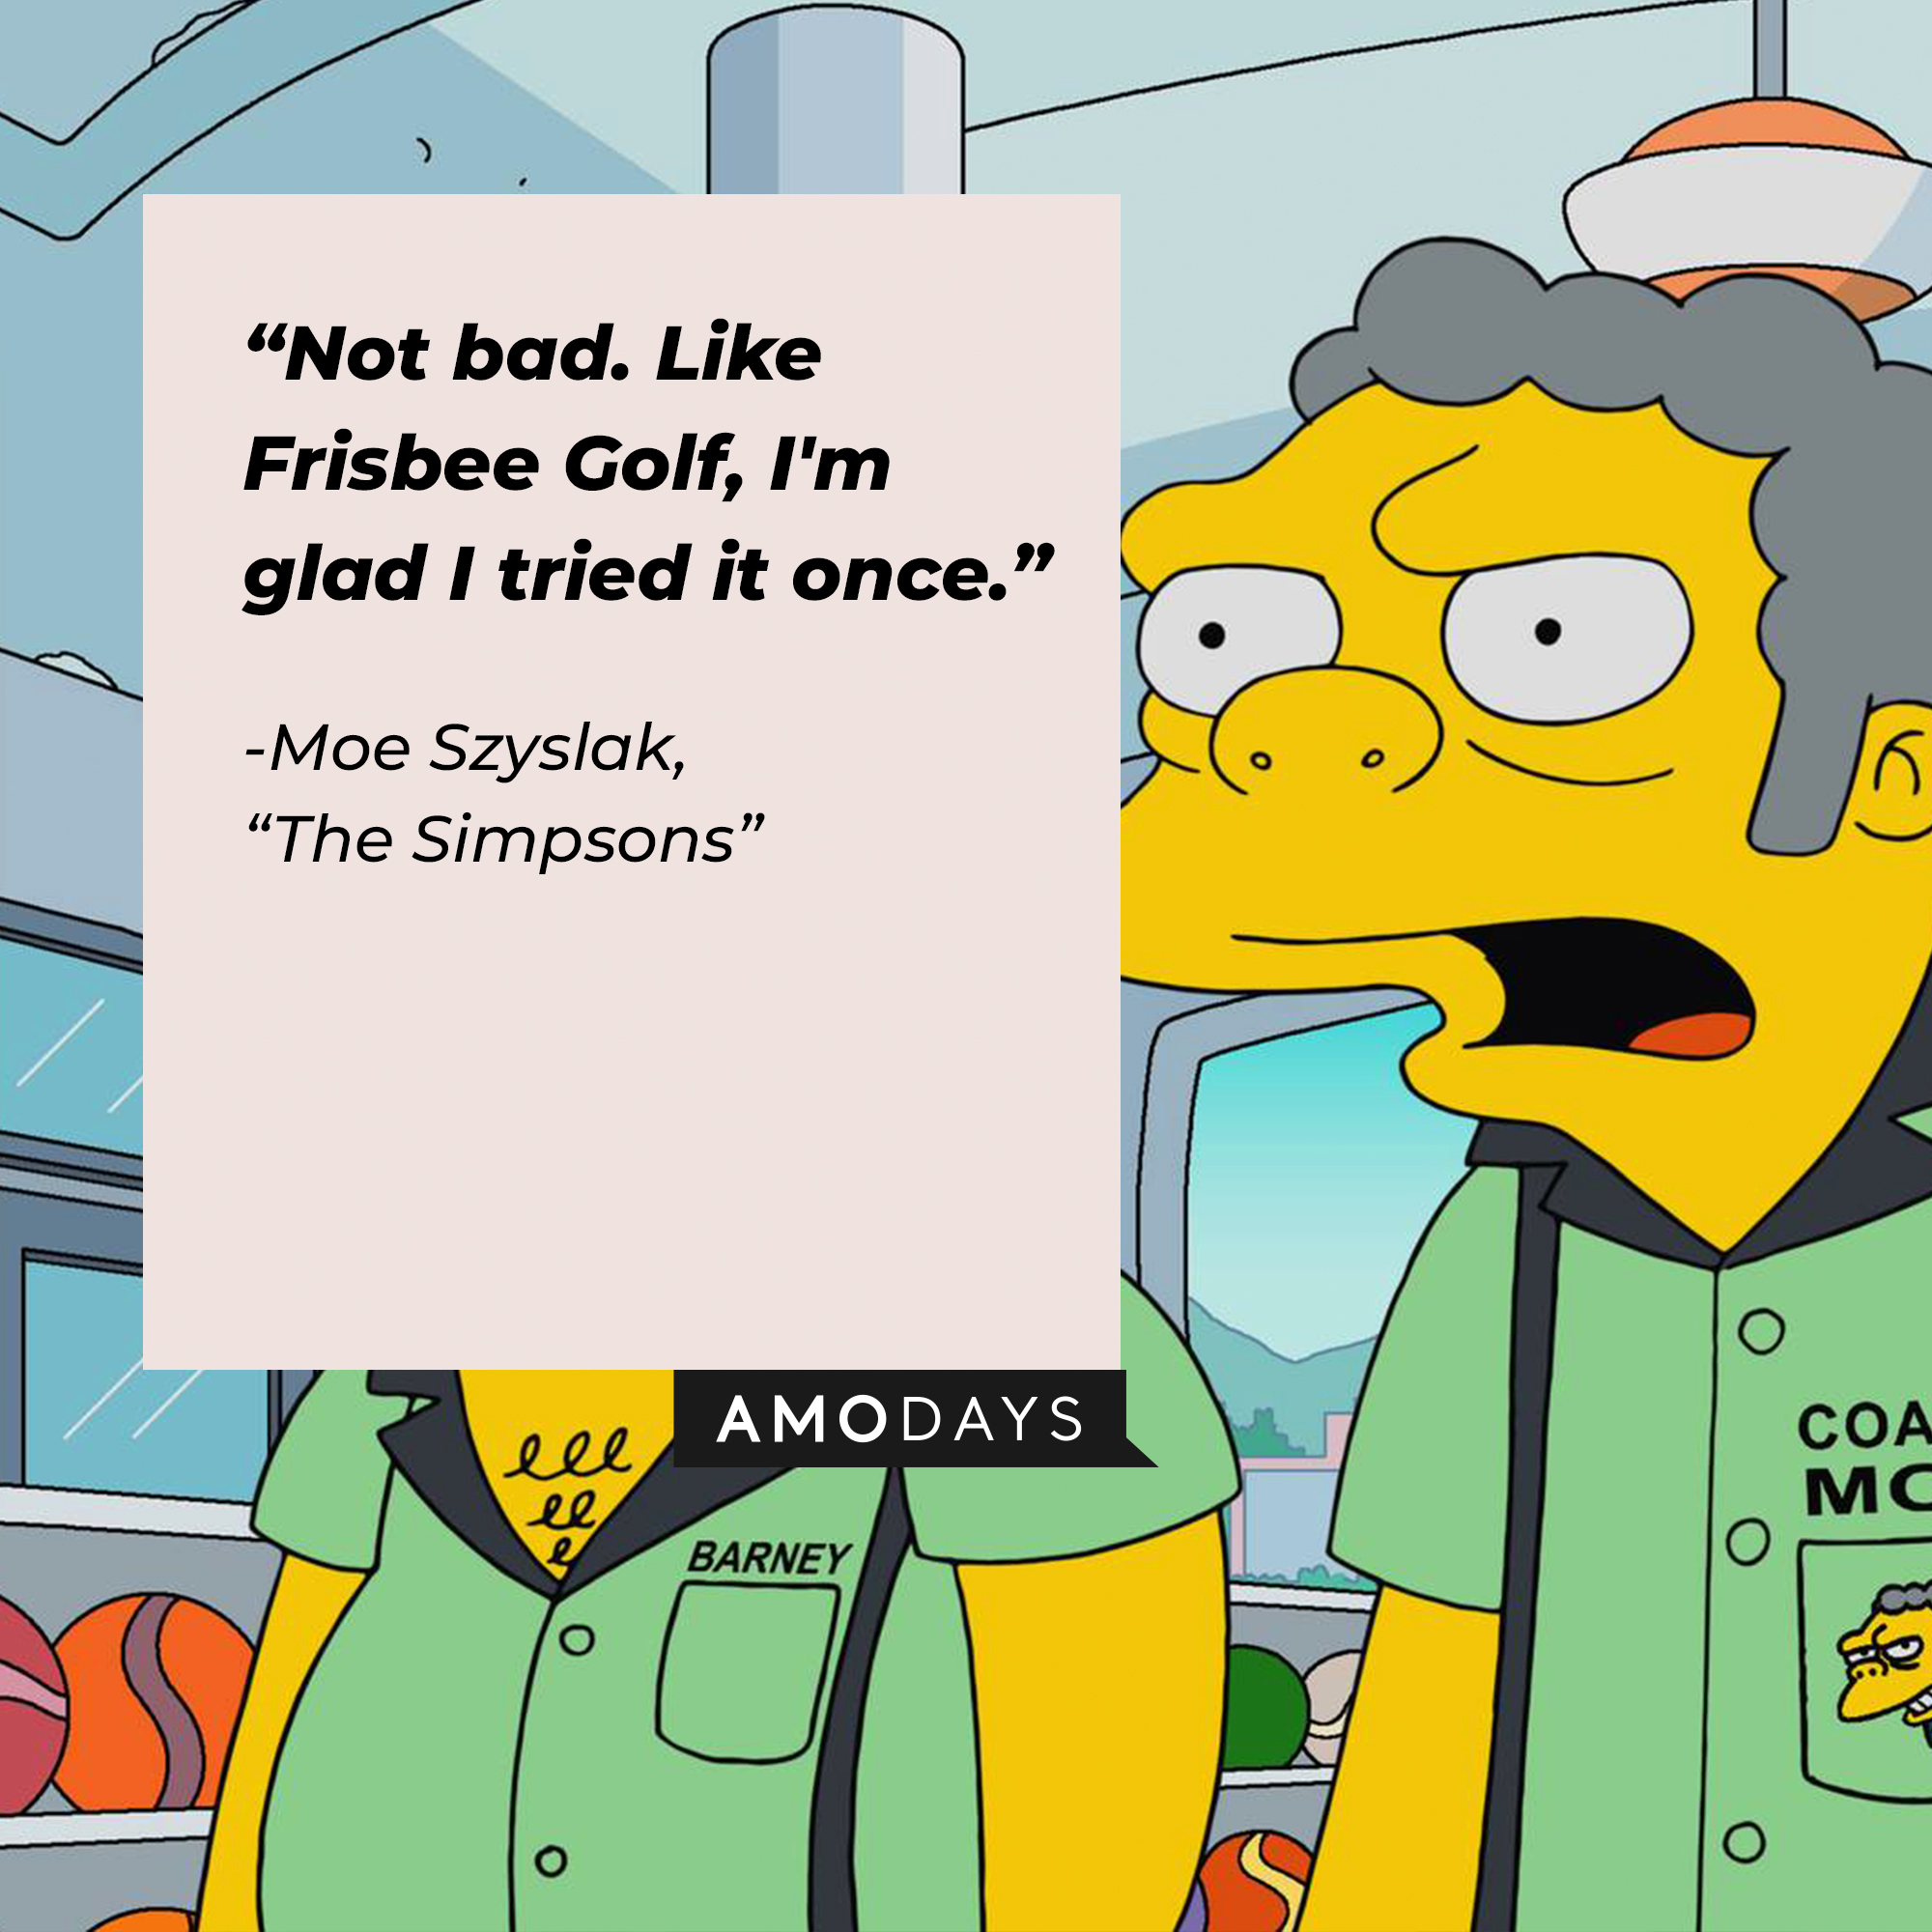 Image of Moe Szyslak with his quote from "The Simpsons:" "Not bad. Like Frisbee Golf, I'm glad I tried it once." | Source: Facebook.com/TheSimpsons